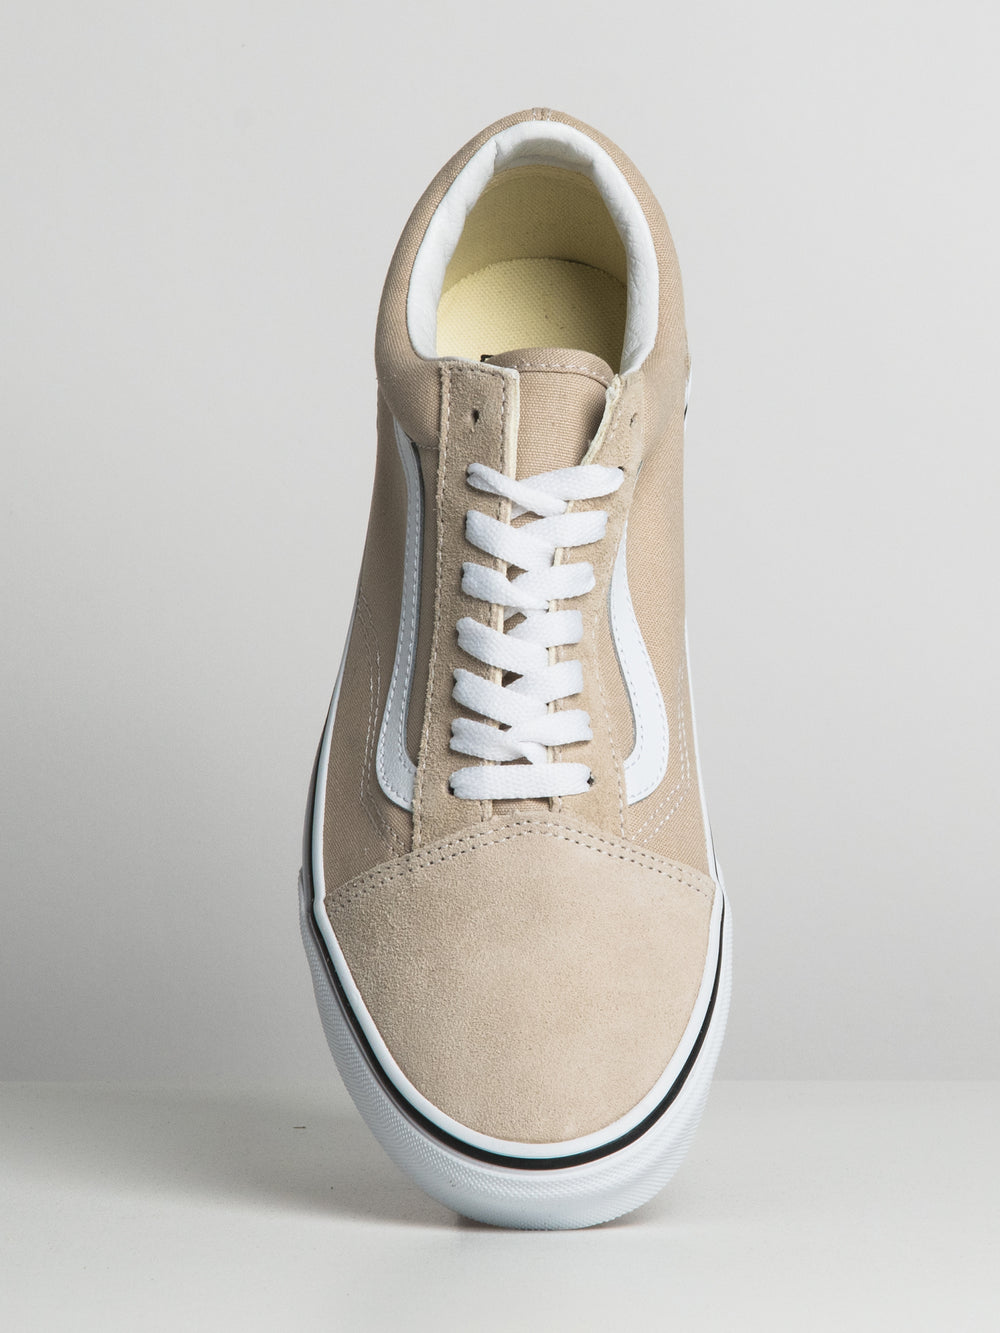 MENS VANS OLD SKOOL COLOUR THEORY - CLEARANCE